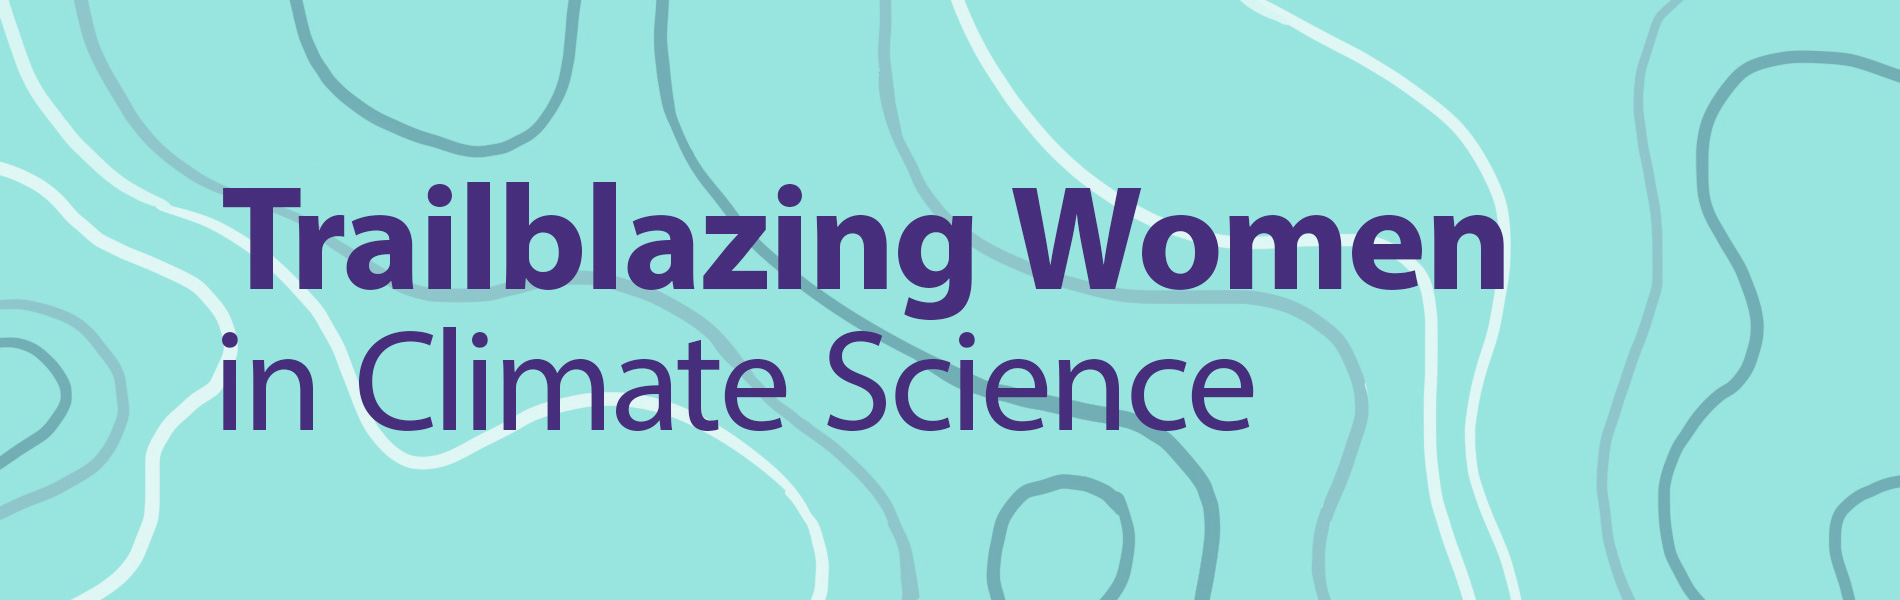 Banner reads: Trailblazing Women in Climate Science